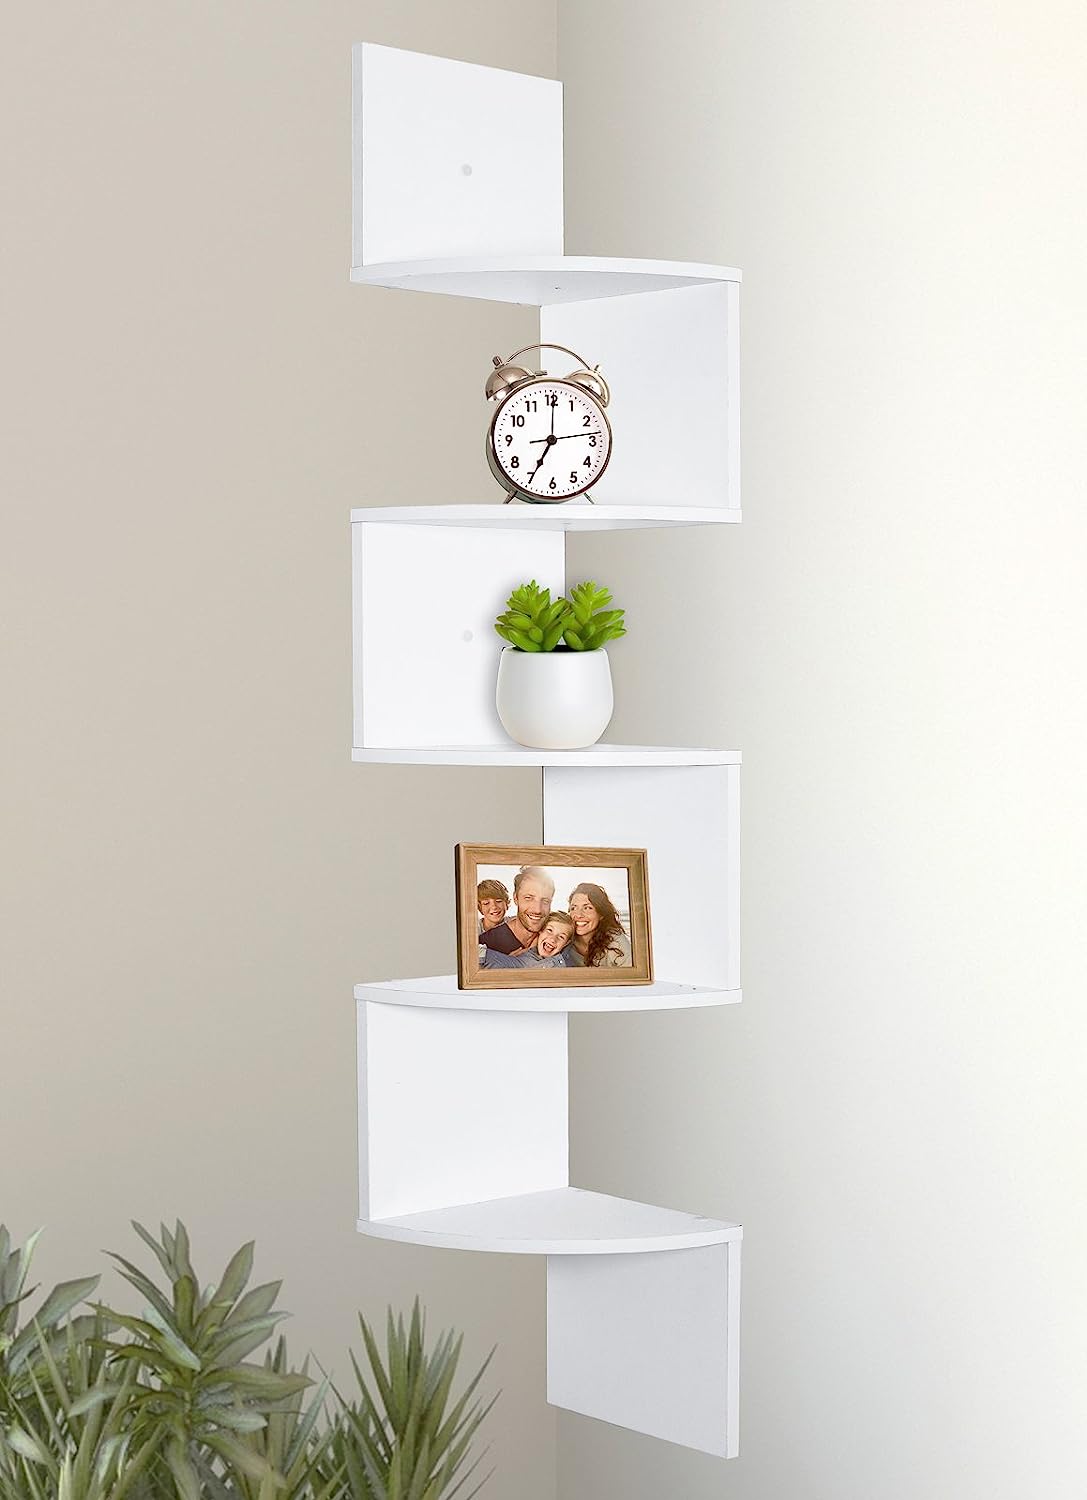 Floating Wall Mount Shelves for Bedrooms and Living Rooms - Wall Decor, Bedroom Decor, Home Office